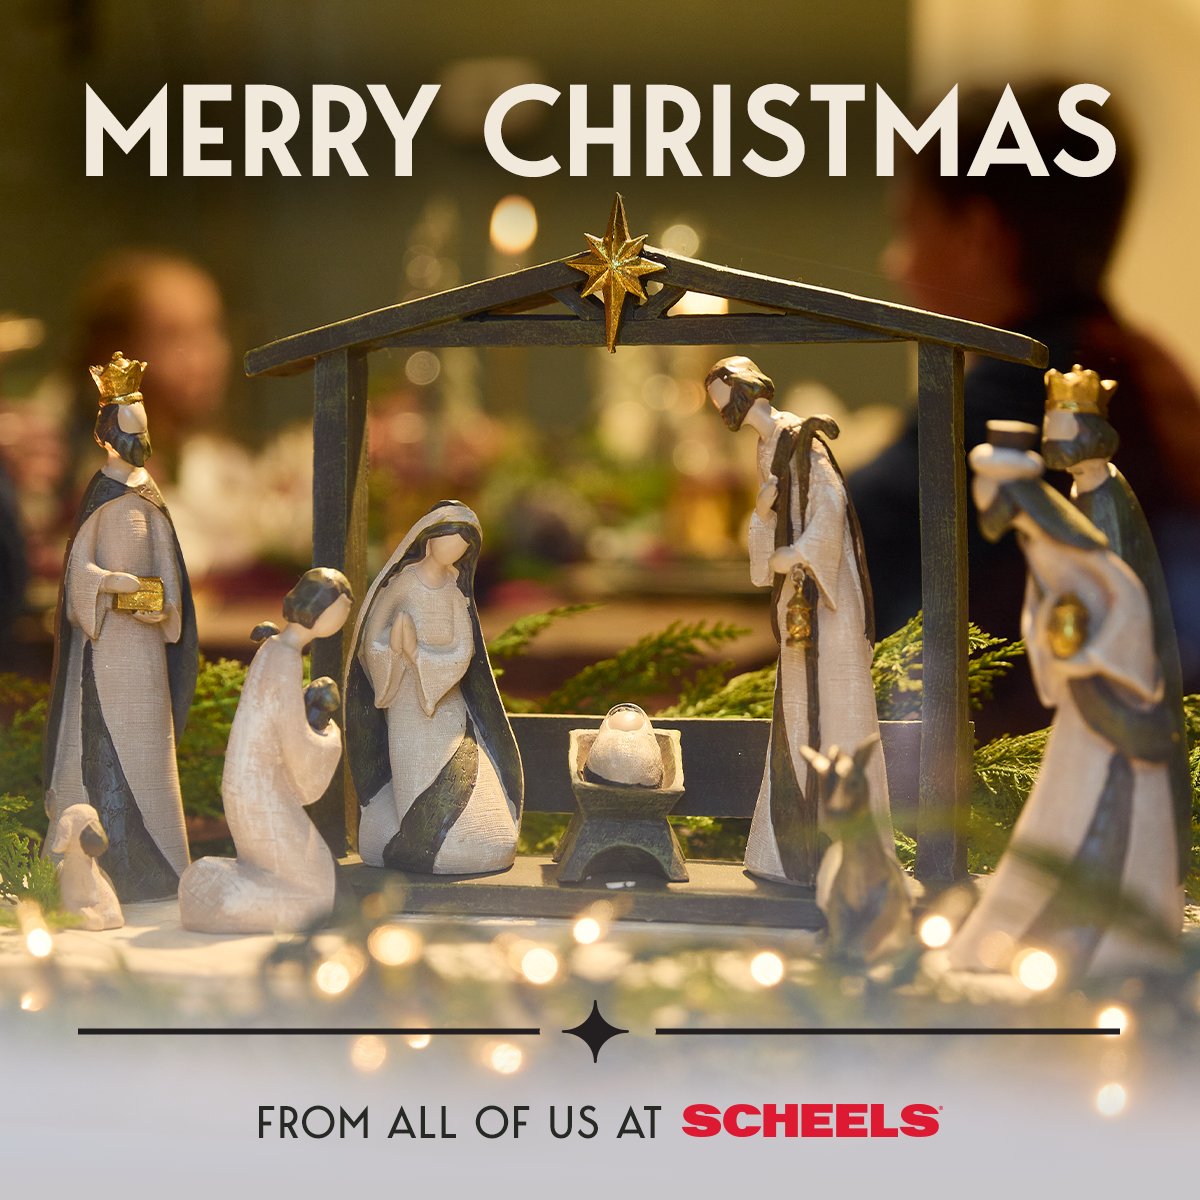 Wishing you peace, happiness and joy. Merry Christmas from all of us at SCHEELS.